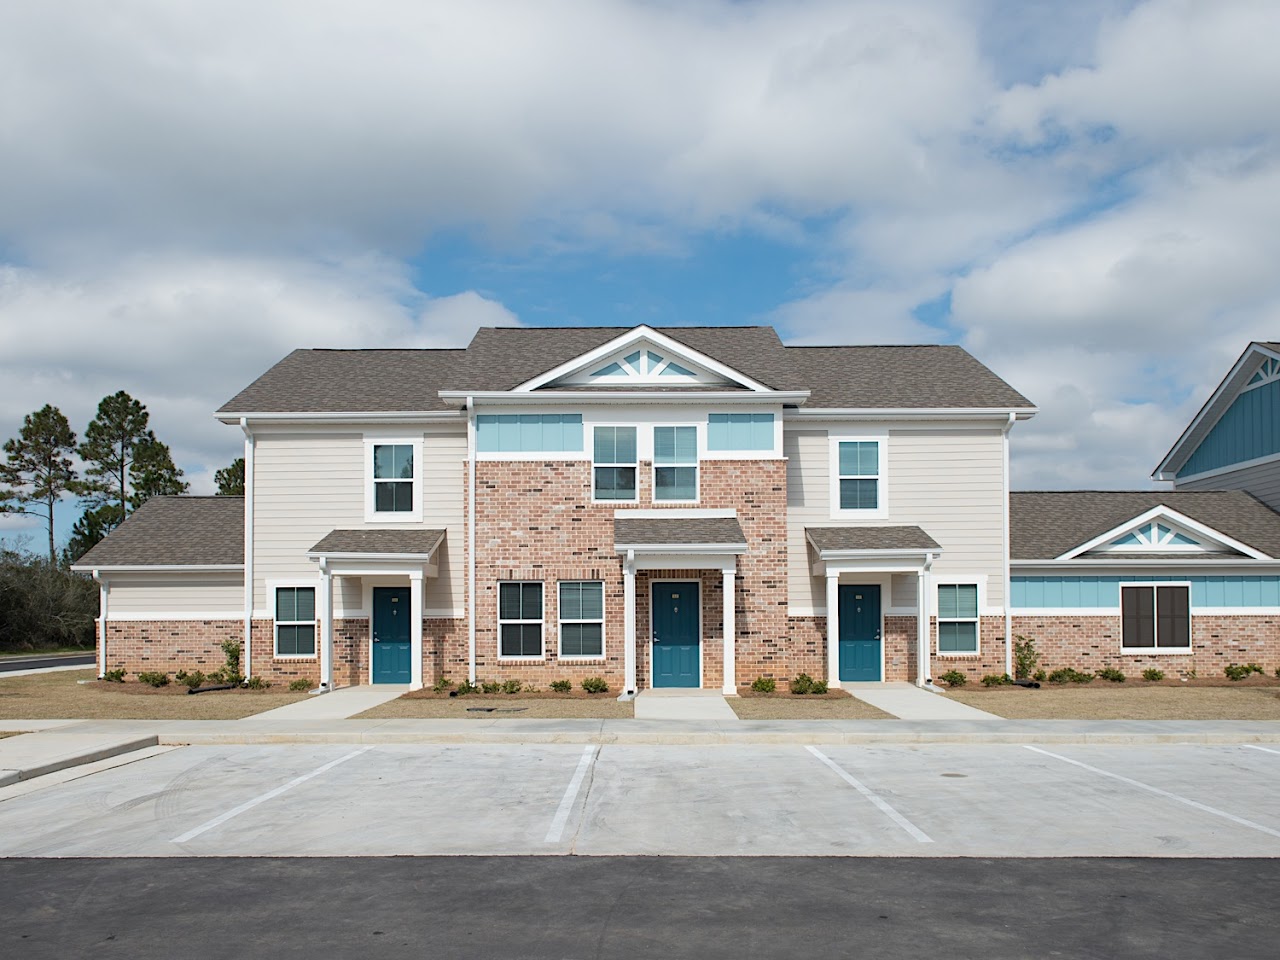 Photo of JASMINE TRAILS APARTMENTS. Affordable housing located at 19451 OAK ROAD W GULF SHORES, AL 36542